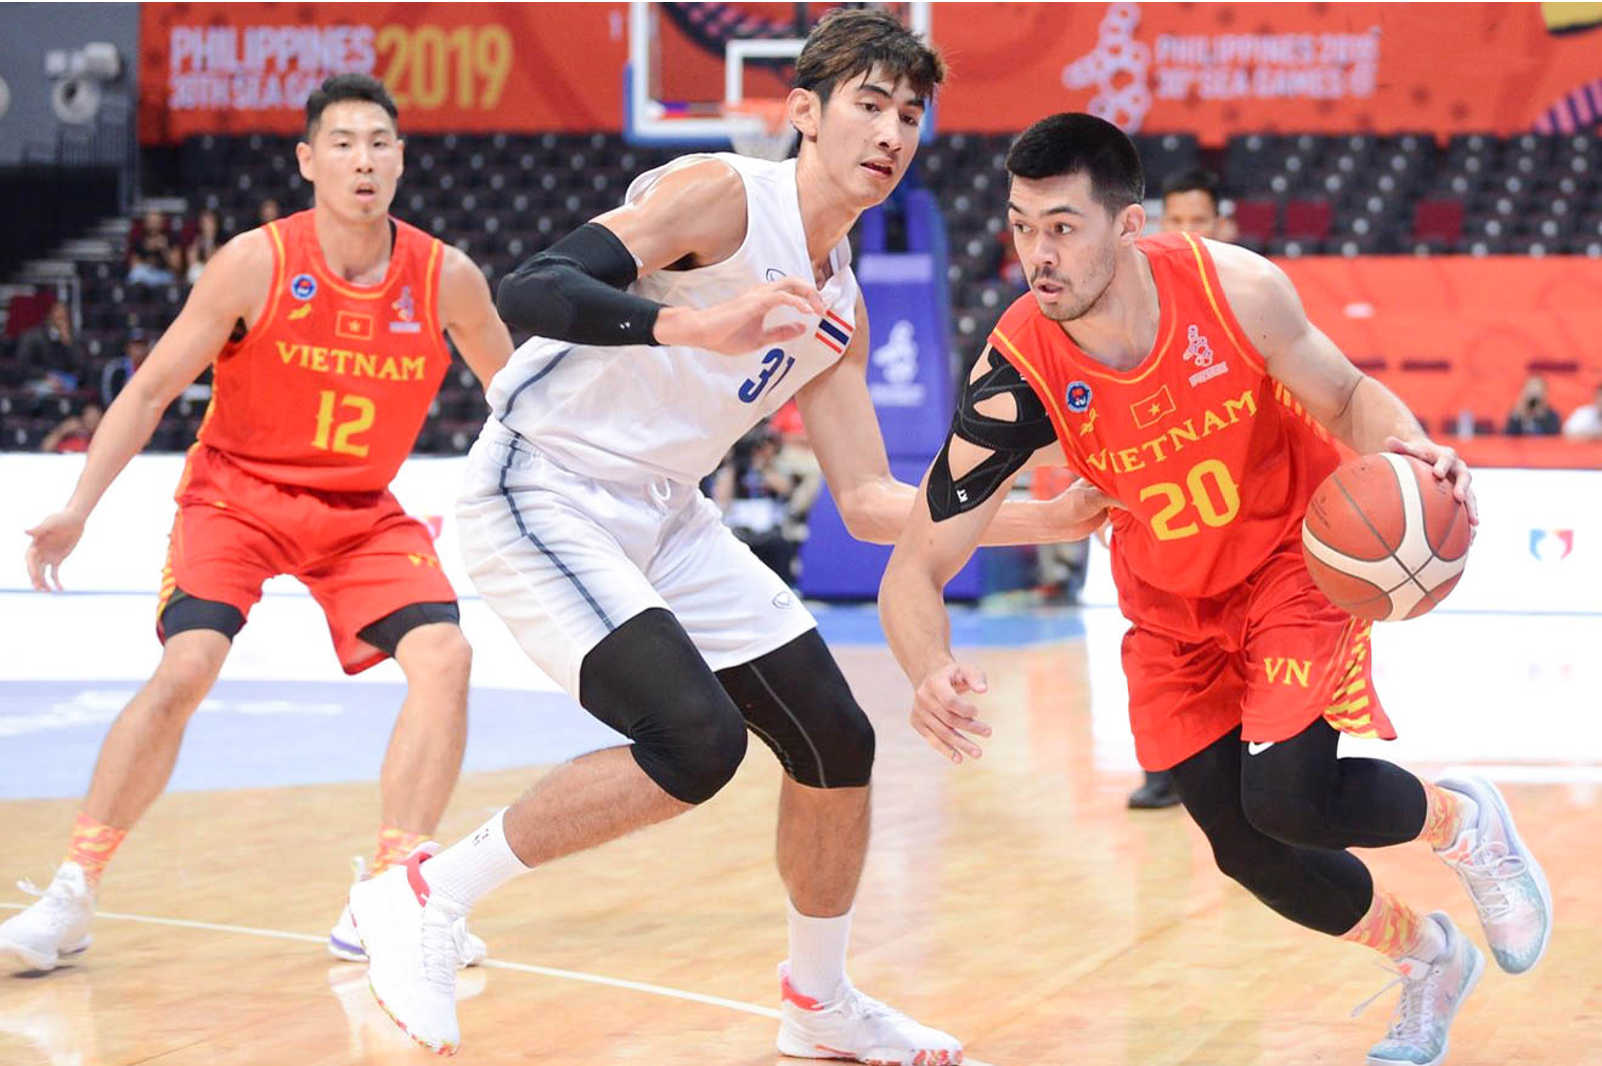 Vietnam make first appearance at Asia’s basketball championship in 6 decades